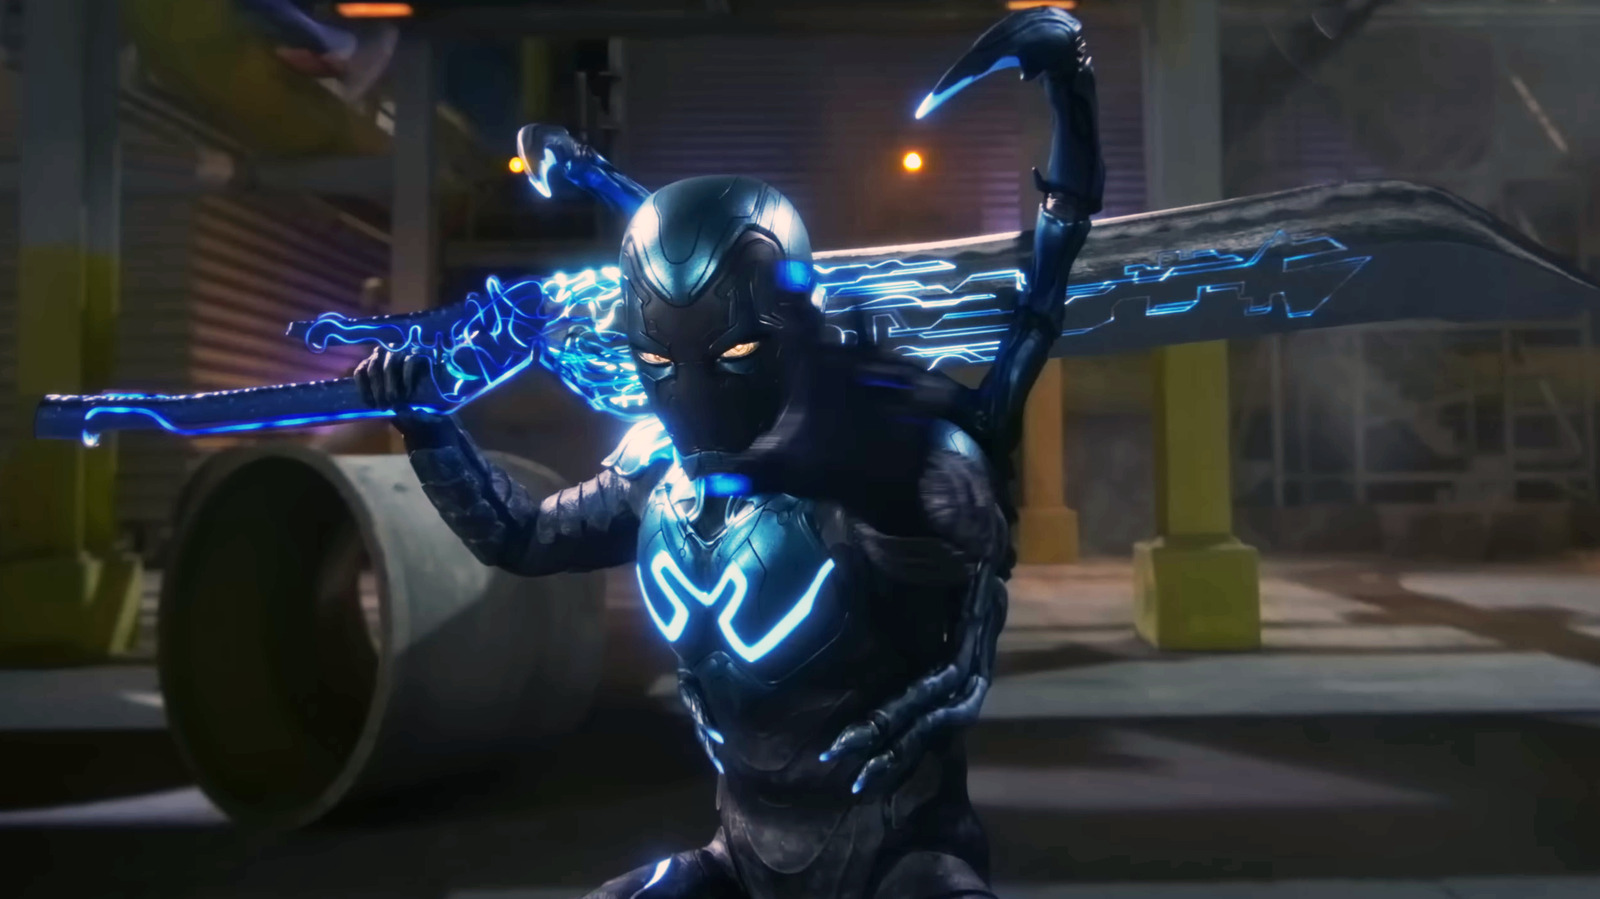 Blue Beetle: Release date, new trailer, cast and more about the upcoming DC  superhero movie